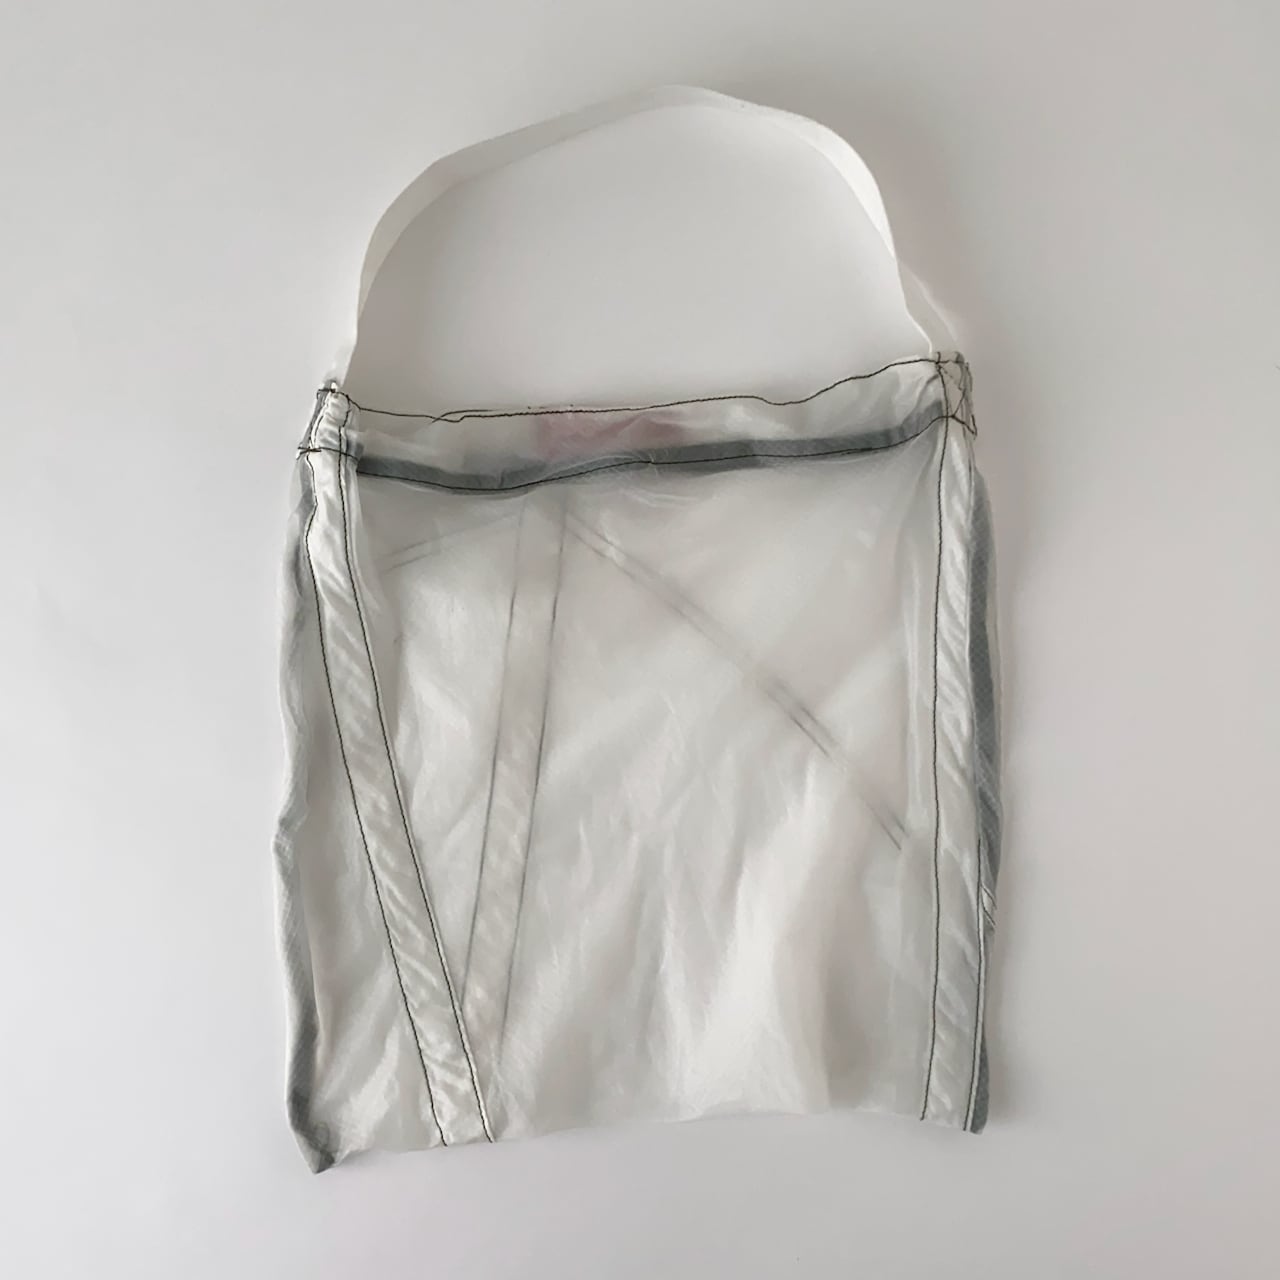 Vintage Parachute Light Bag  White（PUEBCO）｜ヴィンテージ パラシュートバッグ